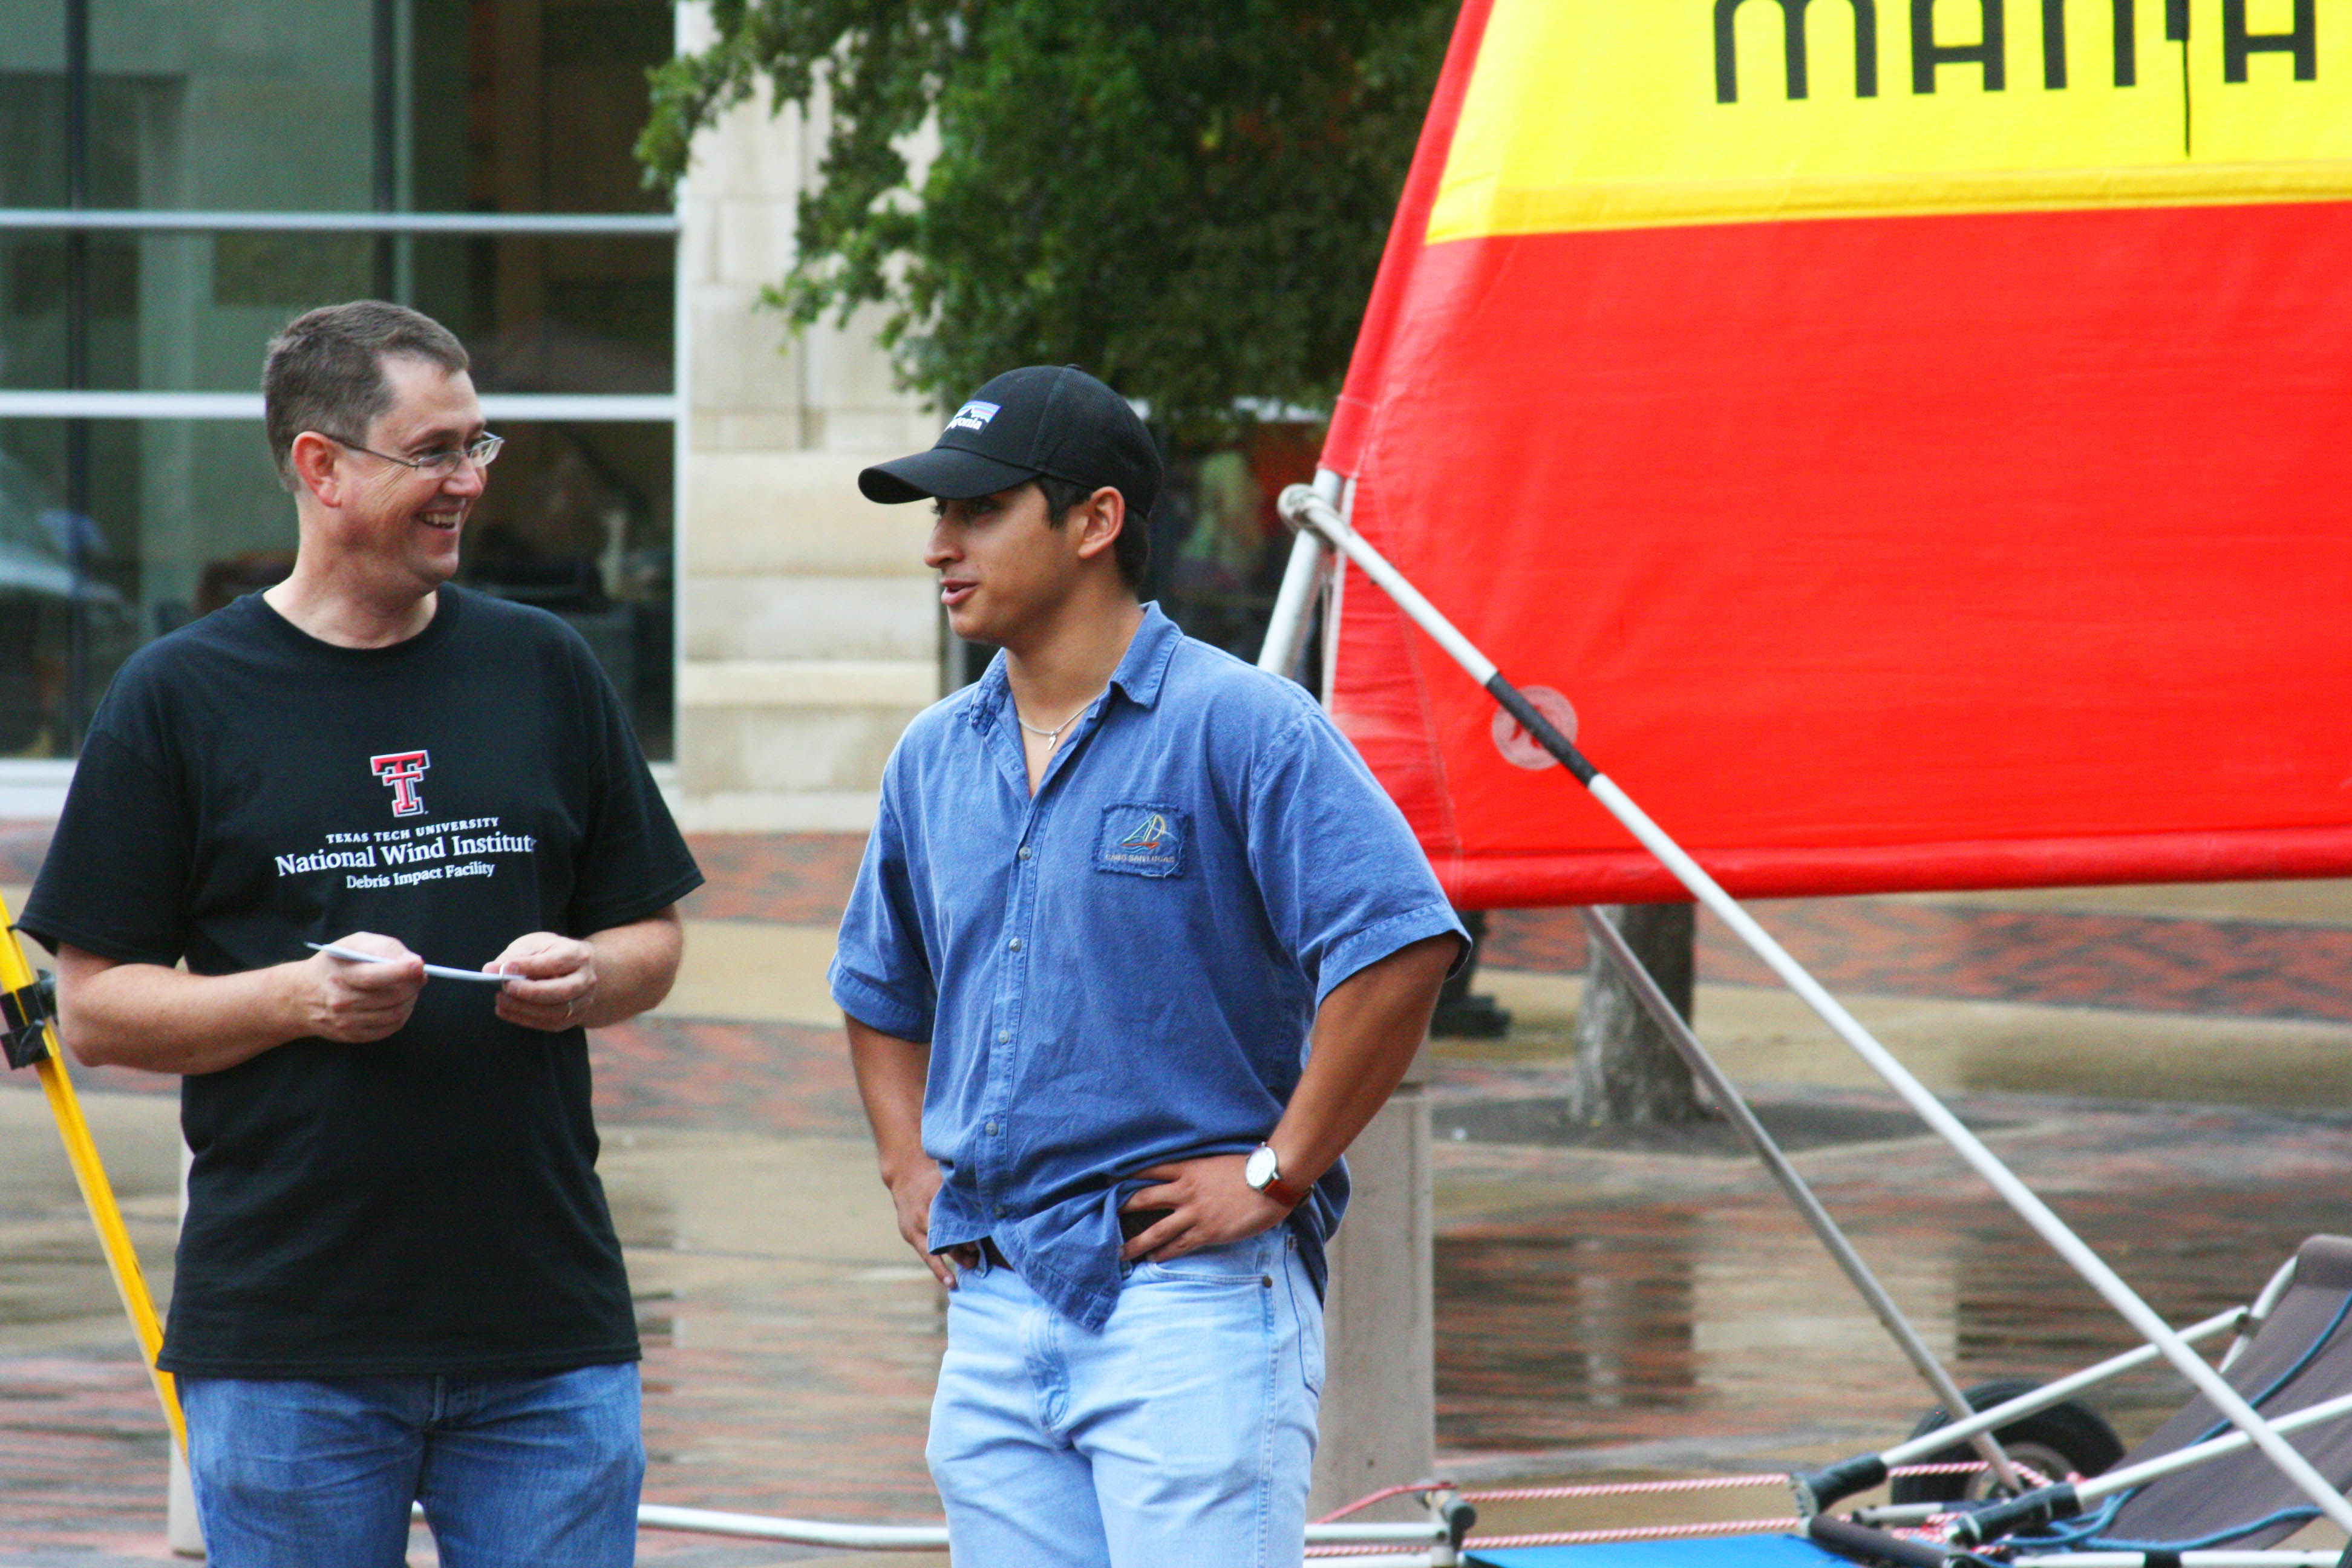  NWI Instructor Dr. Chris Pattison chats with a student during TTU Wind Day.